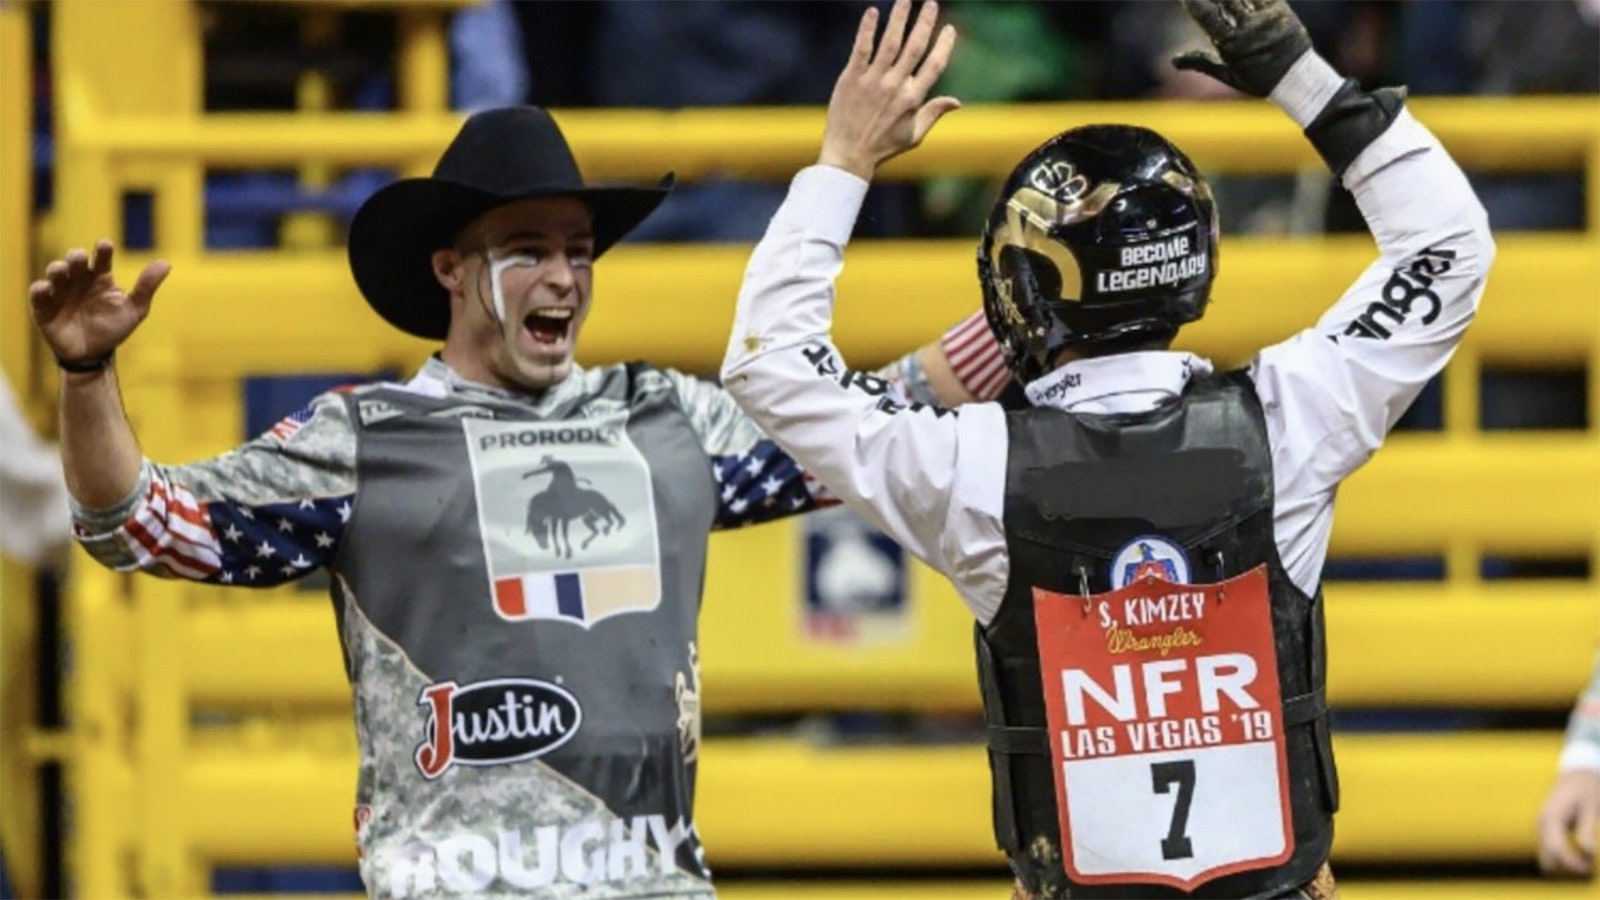 Bullfighter Dusty Tuckness, left, and bull rider Sage Kimzey celebrate a successful ride at the 2019 National Finals Rodeo.